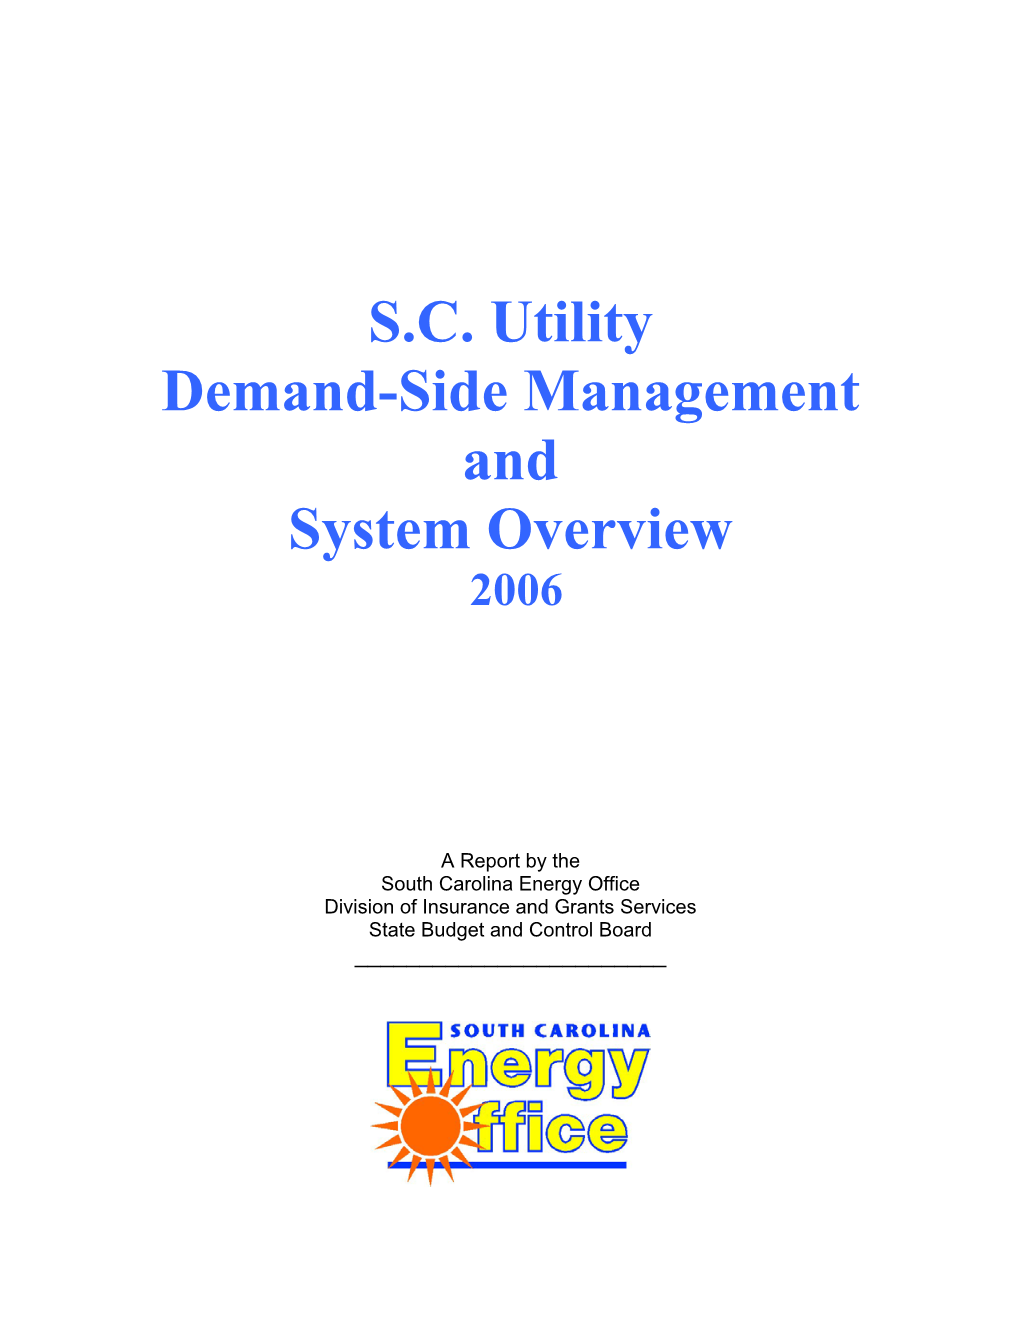 S.C. Utility Demand-Side Management and System Overview 2006